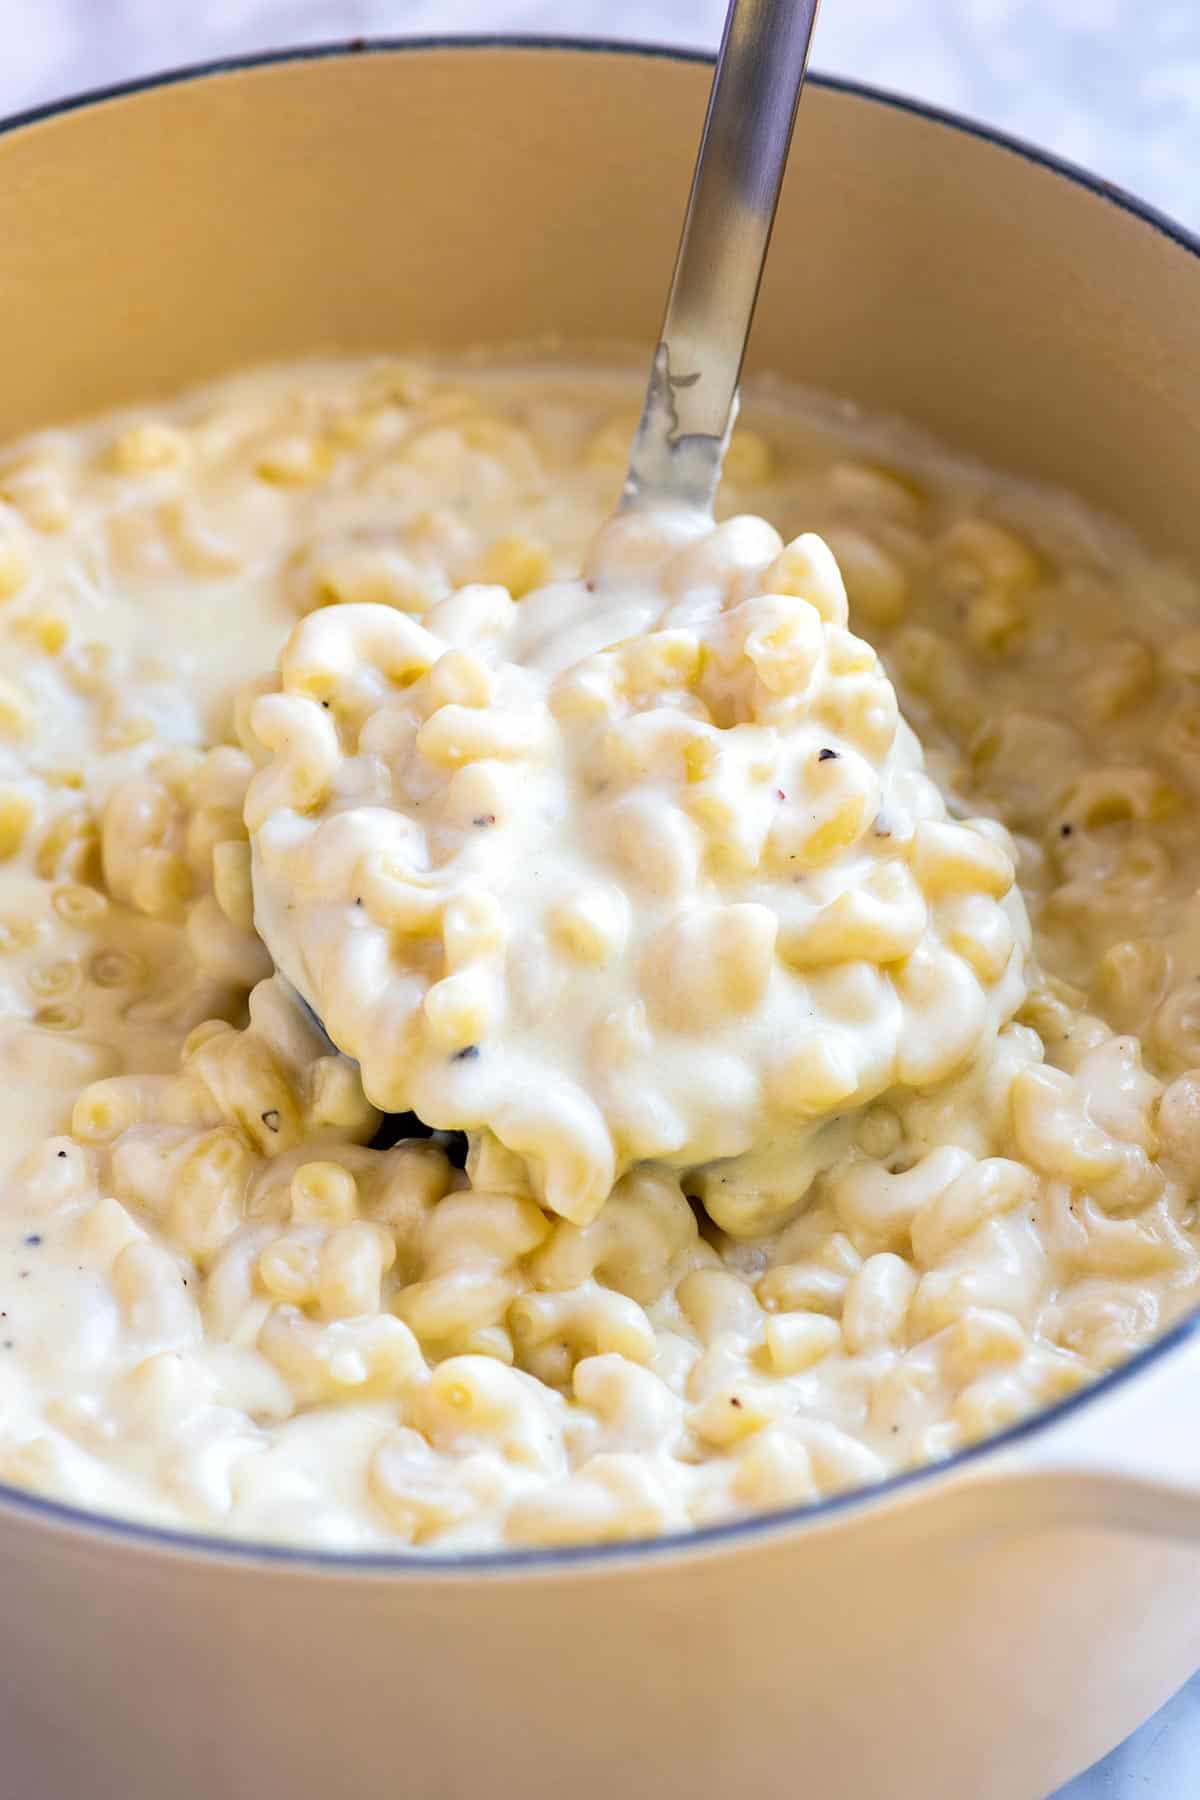 Serve the macaroni and cheese on the stovetop